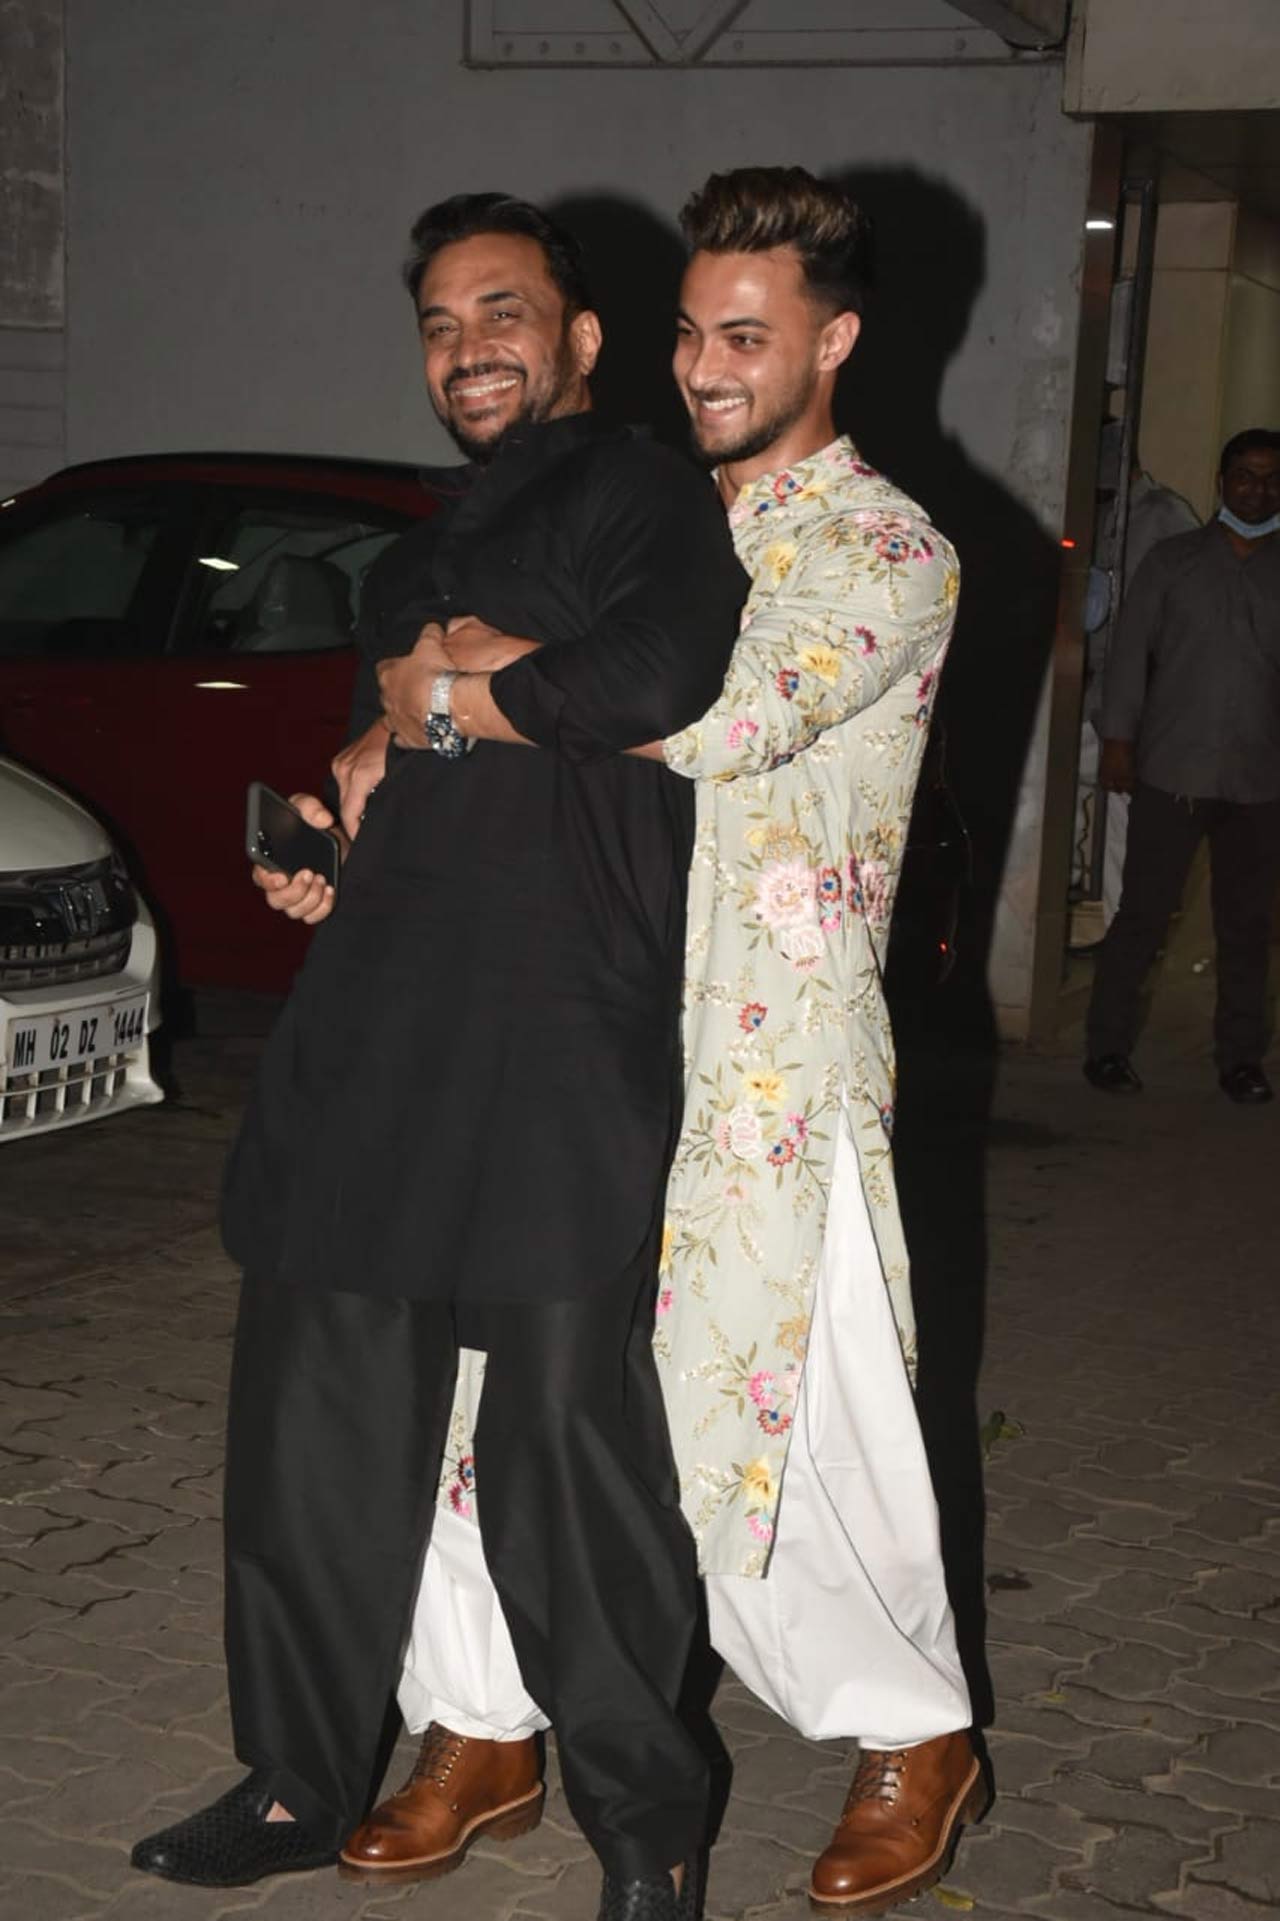 Aayush Sharma and Salman Khan's bodyguard Shera was snapped goofing around. Speaking of Aayush, the actor will be seen in 'Antim: The Final Truth' alongside Salman.